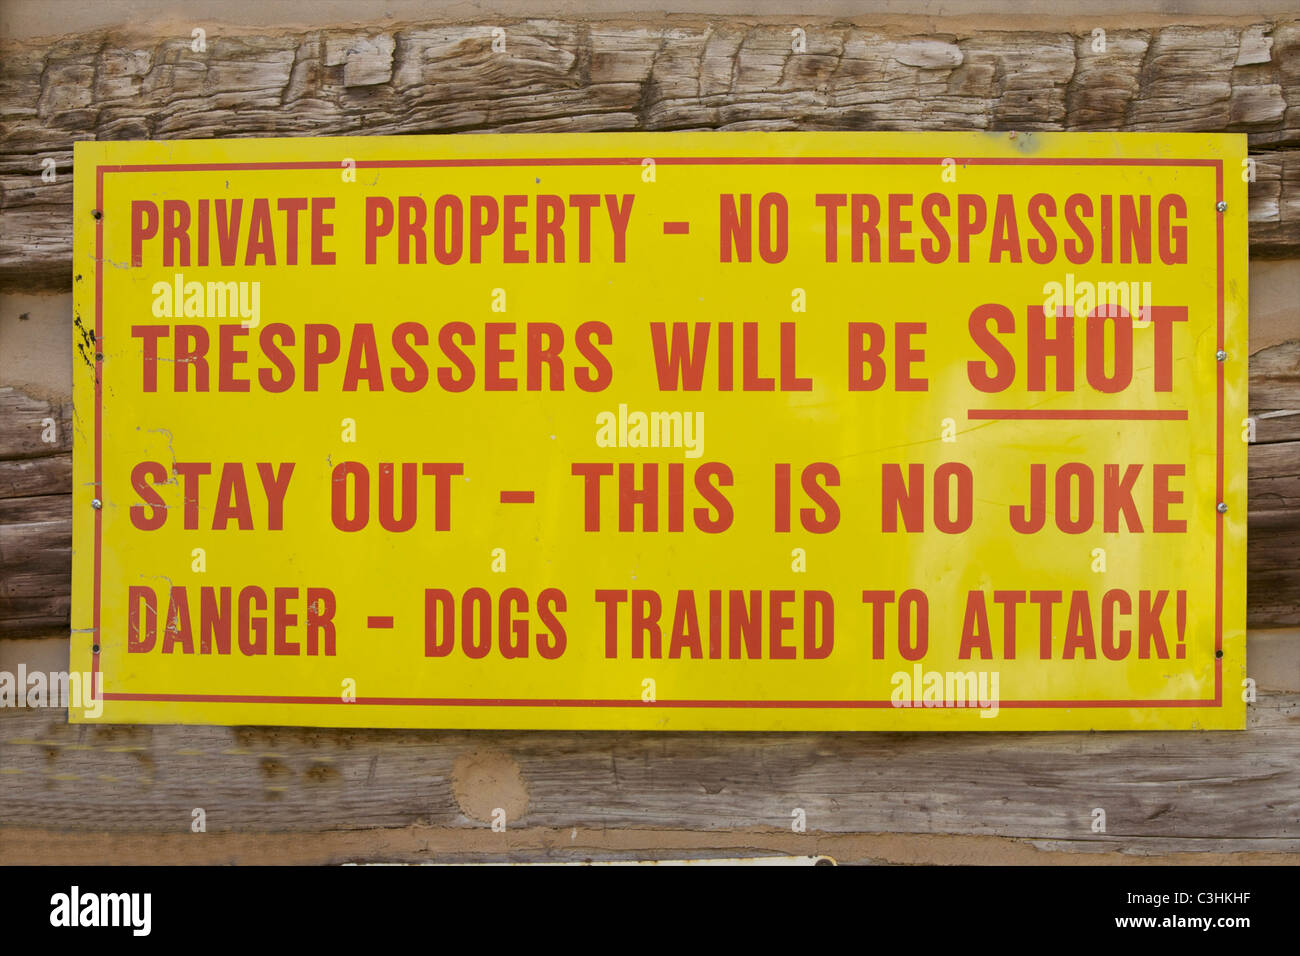 No trespassing sign on the side of a log cabin. Stock Photo